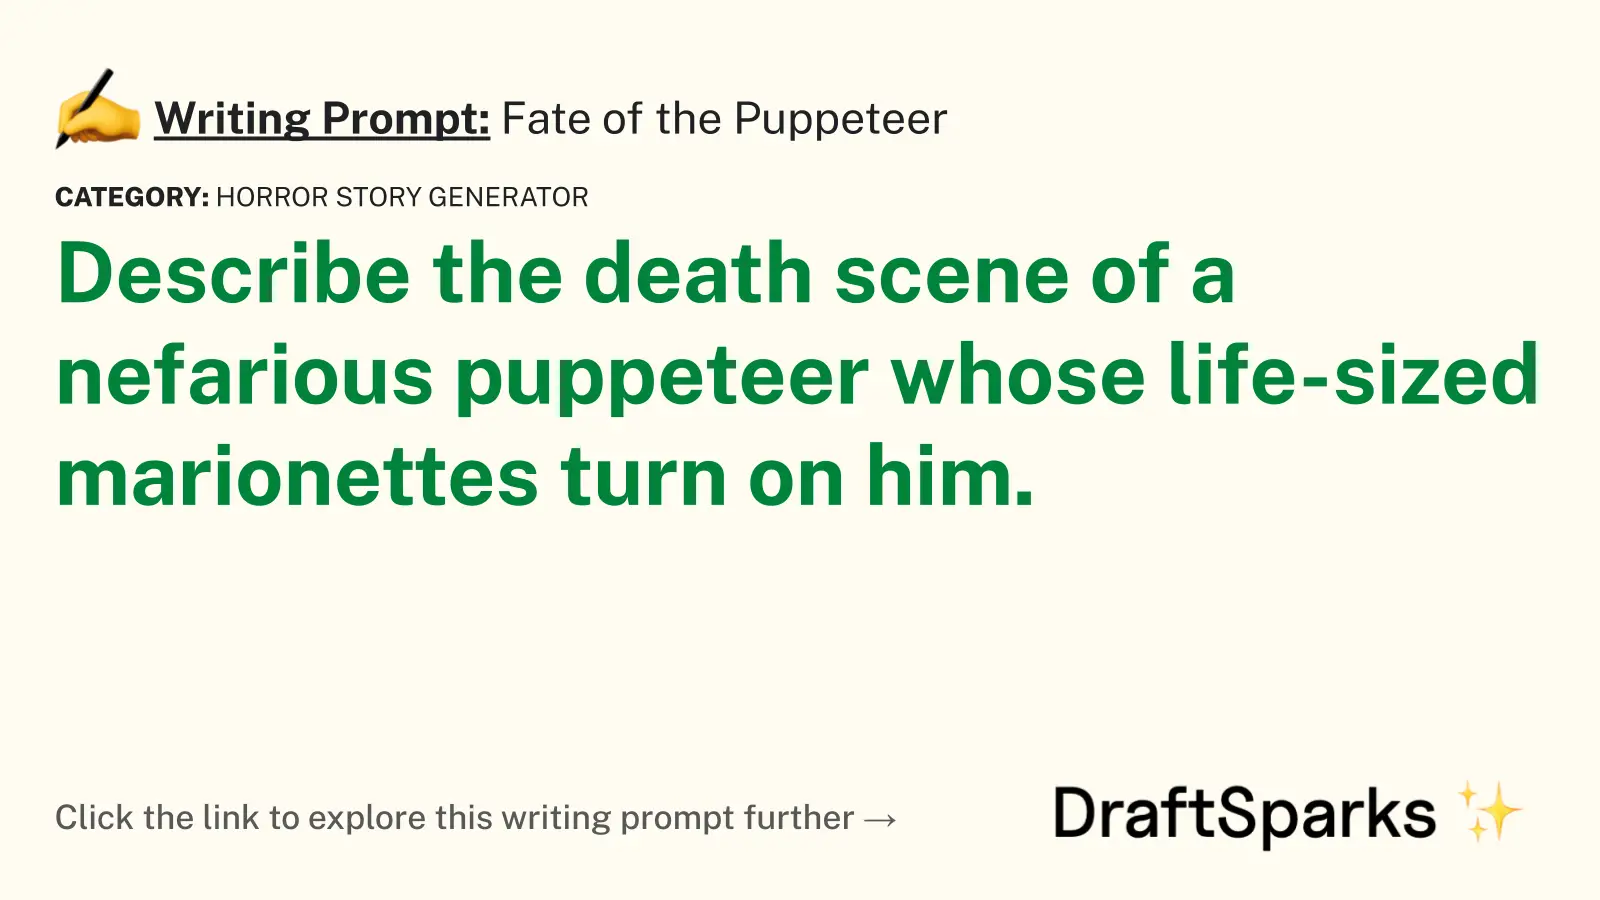 Fate of the Puppeteer